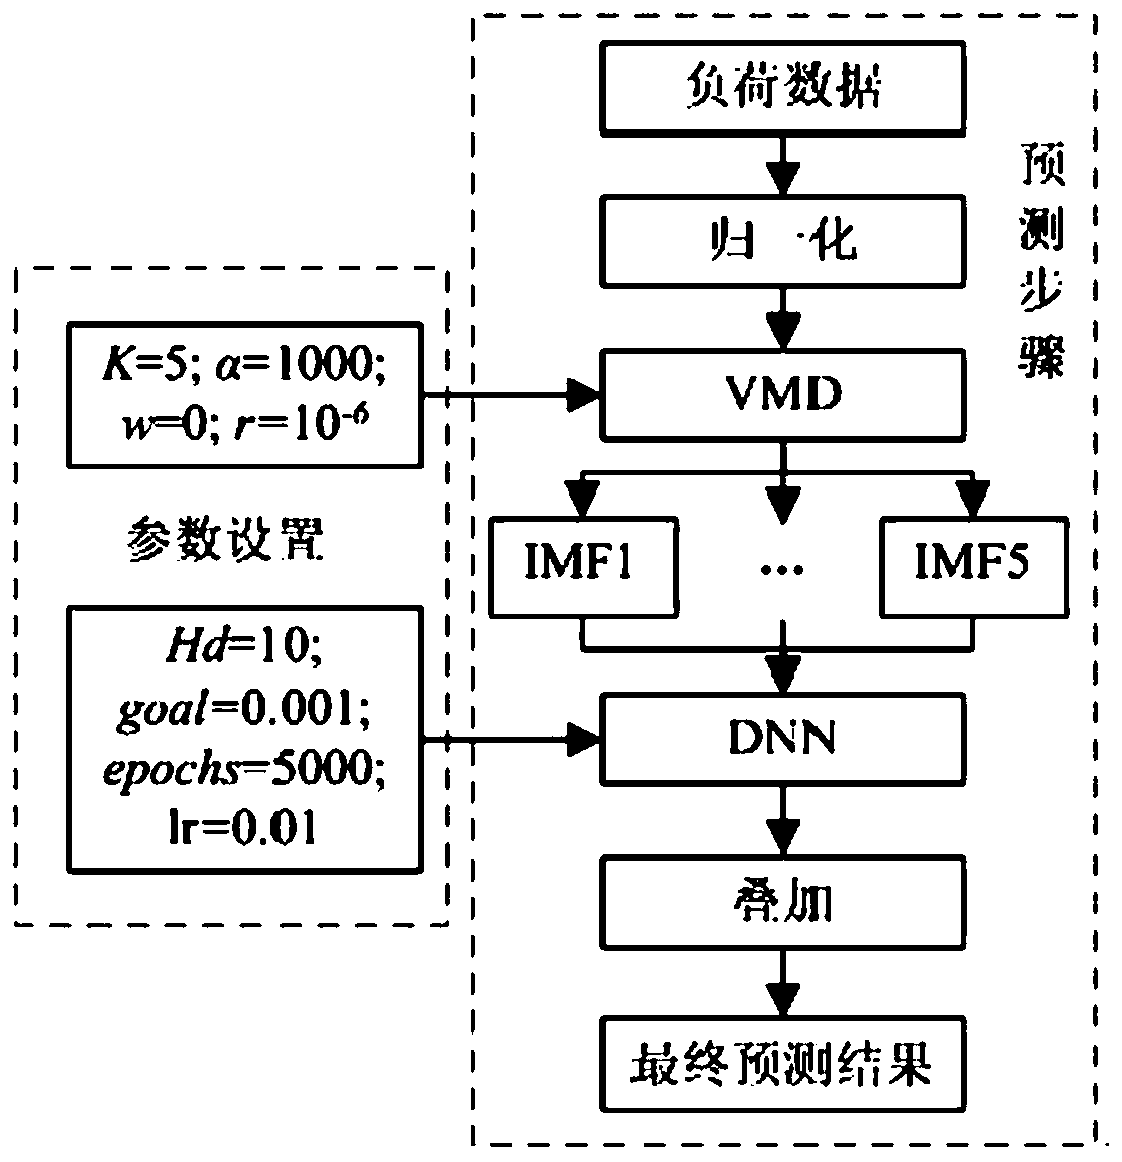 Prediction method based on VMD and DNN and application in short-term load prediction